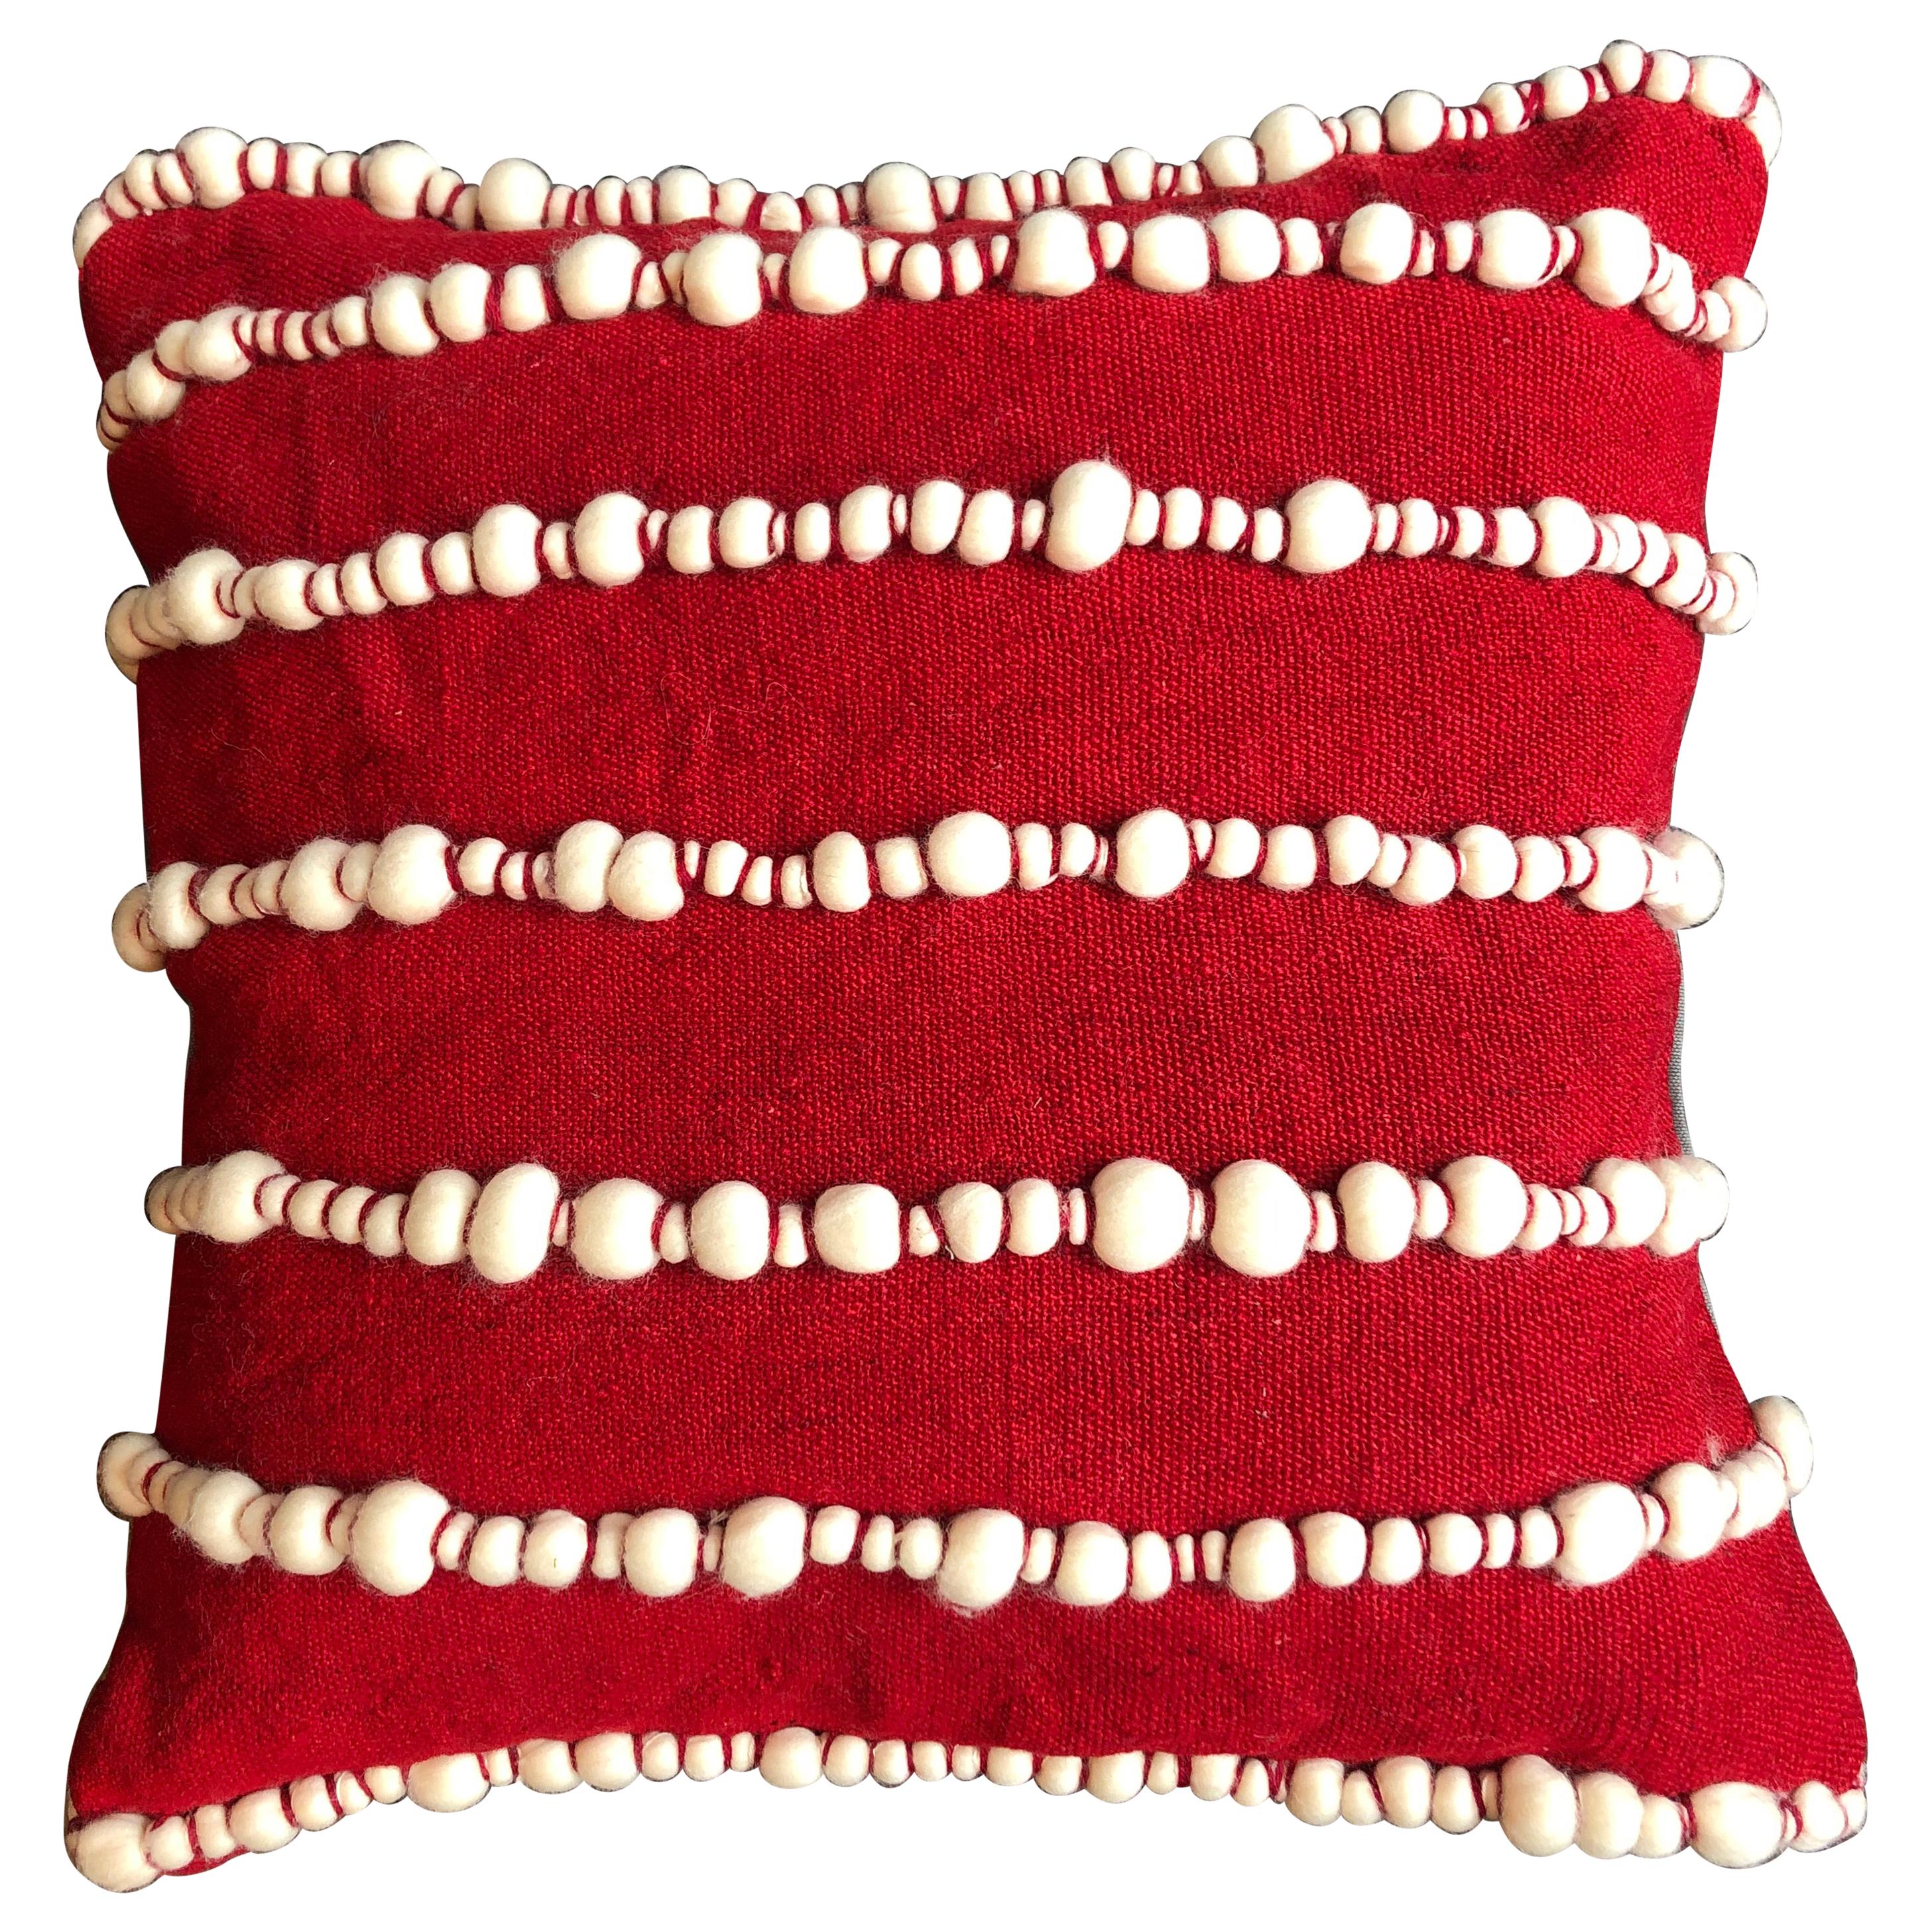 "Lido II" Red Merino Wool Pillow by Le Lampade For Sale